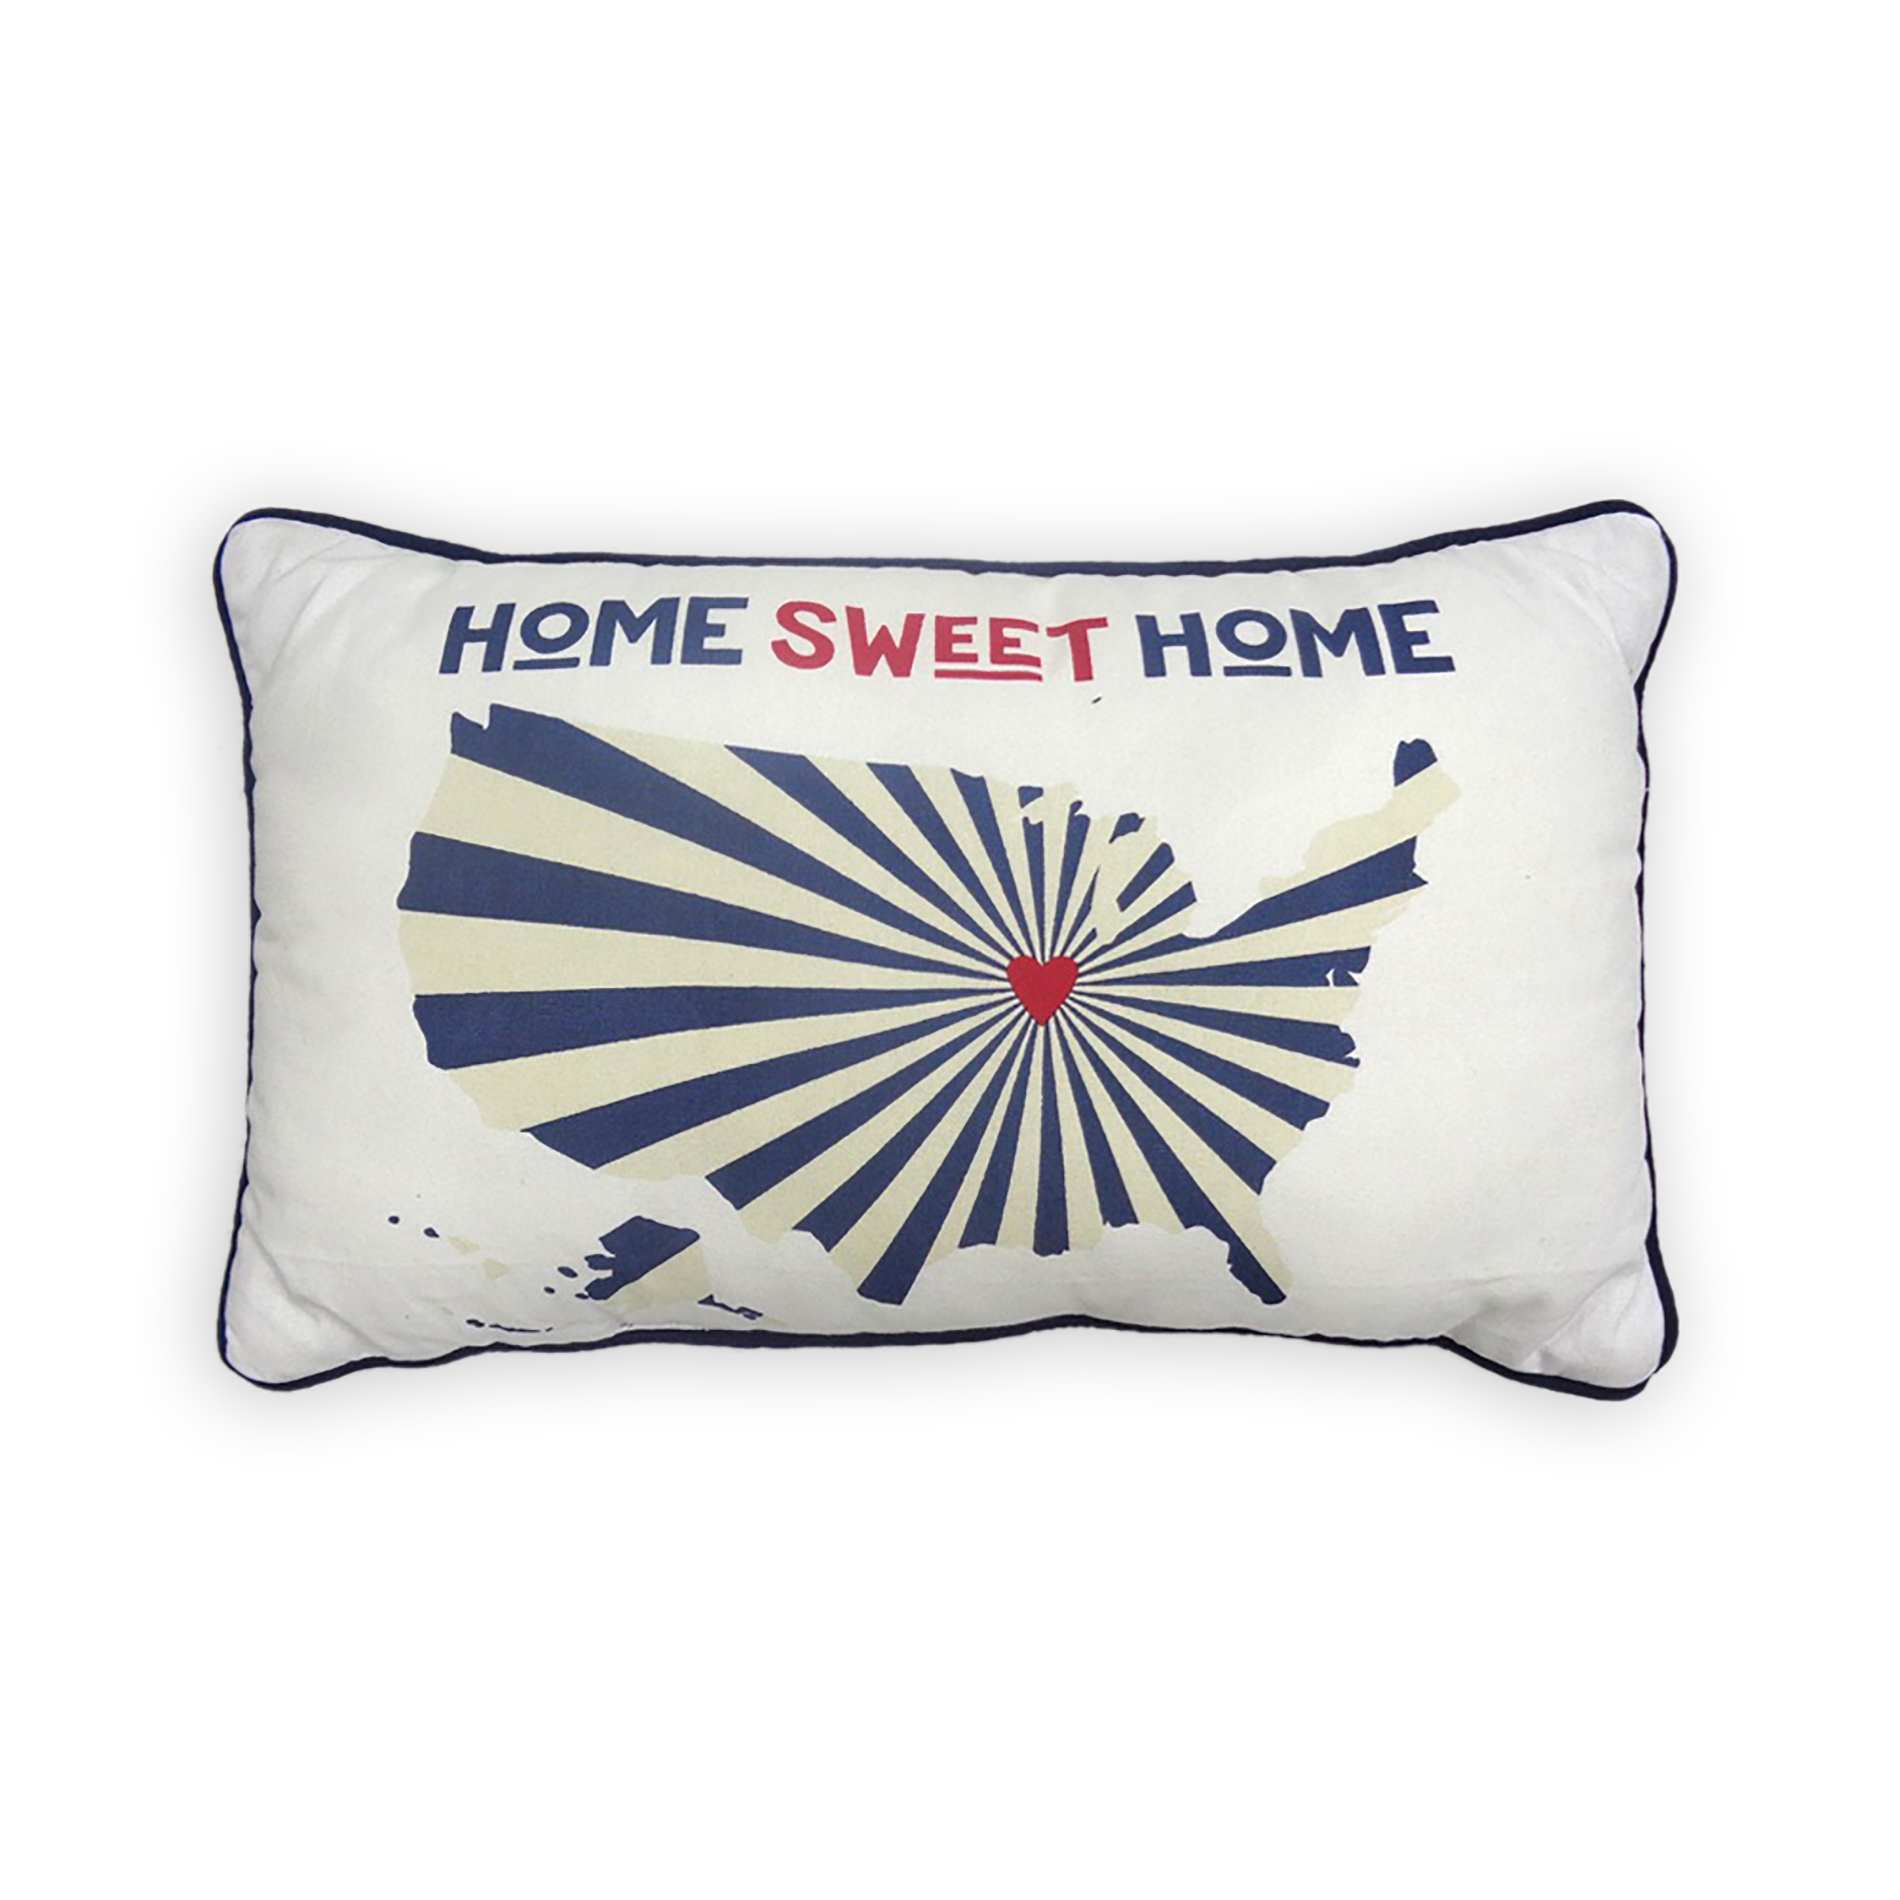 Home Sweet Home with Map Decorative Pillow